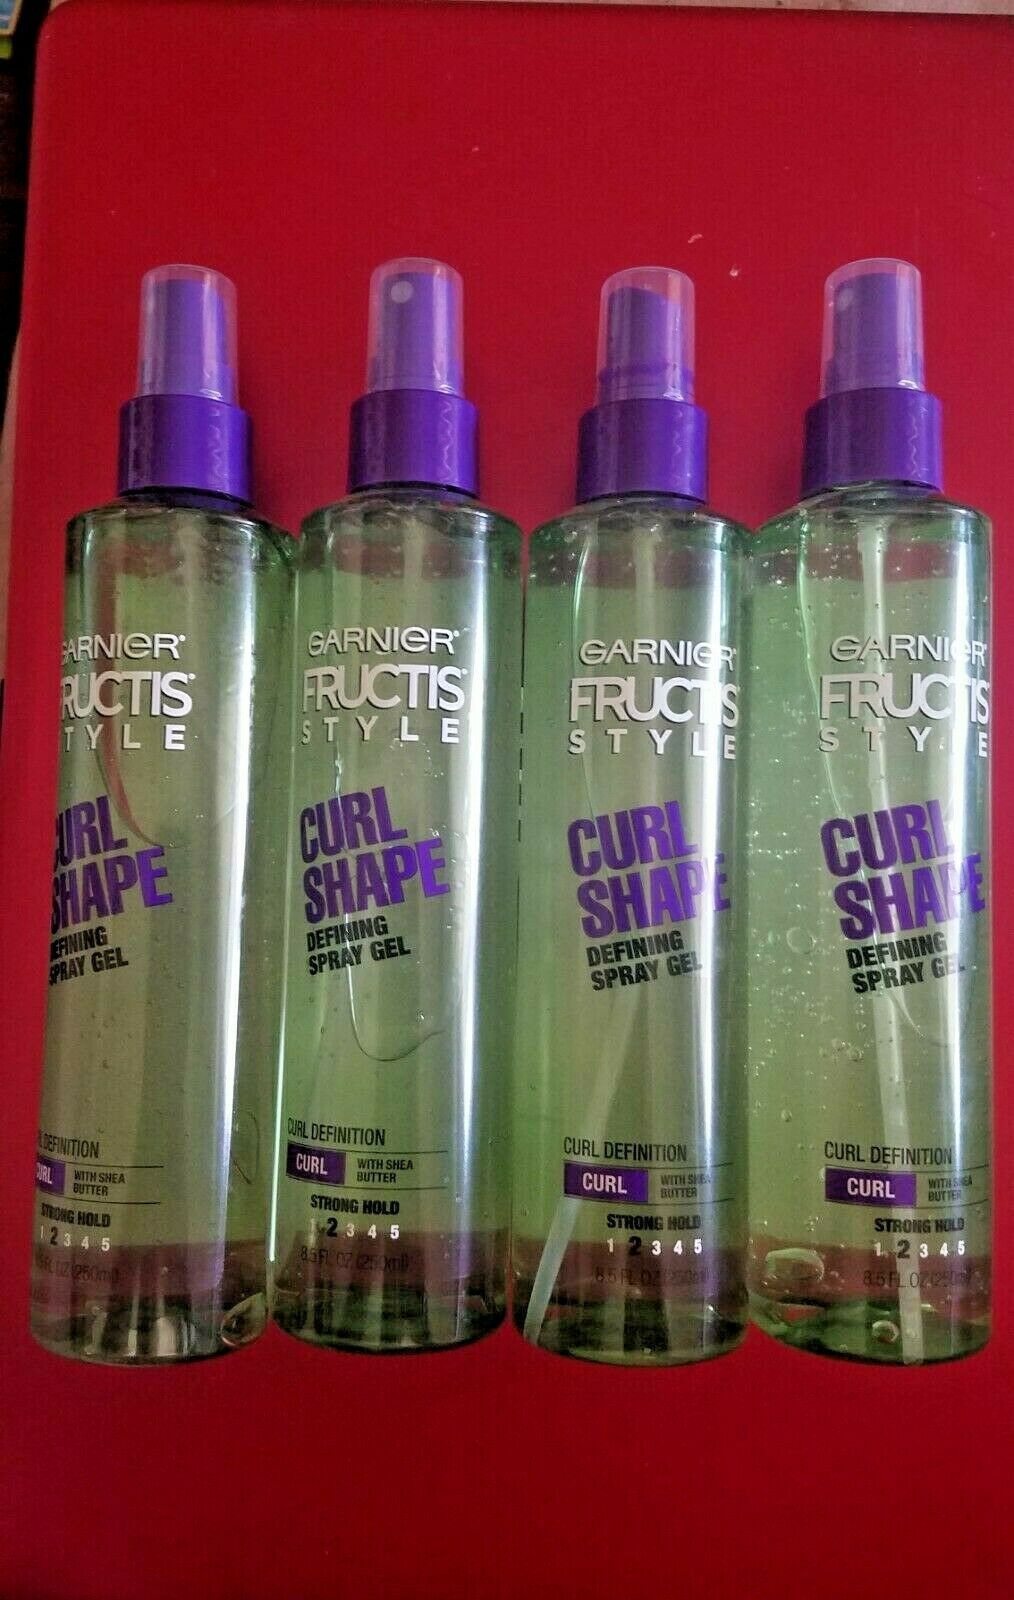 Primary image for 4 PACK GARNIER FRUCTIS STYLE CURL SHAPE DEFINING SPRAY GEL FOR CURLY HAIR 8.5 